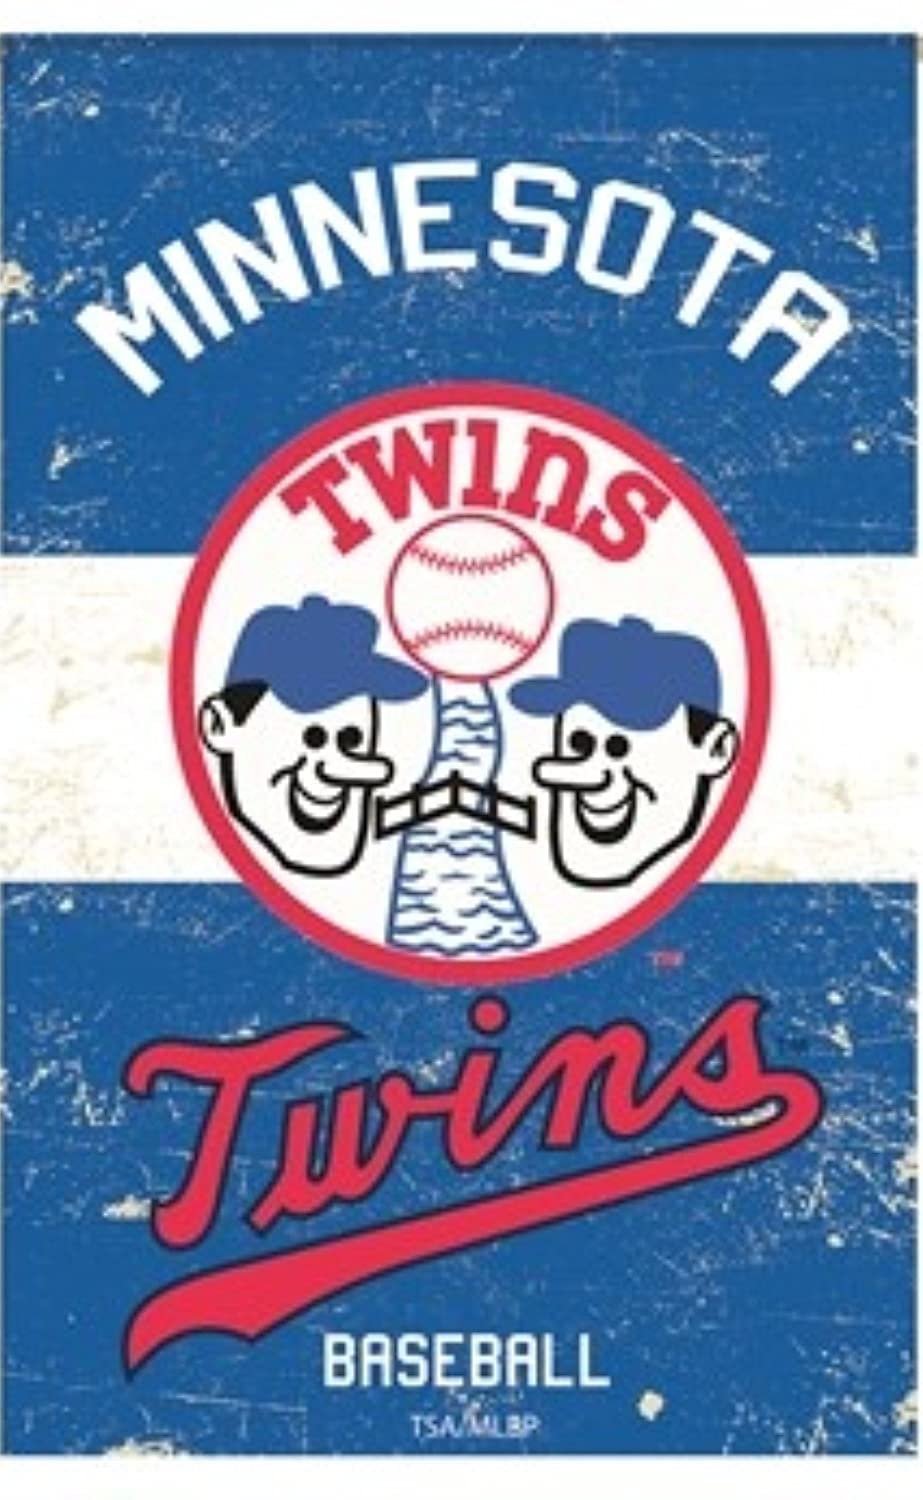 Minnesota Twins Premium Double Sided House Flag Banner, Vintage Styling, 28x44 Inch, Display Pole Sold Separately